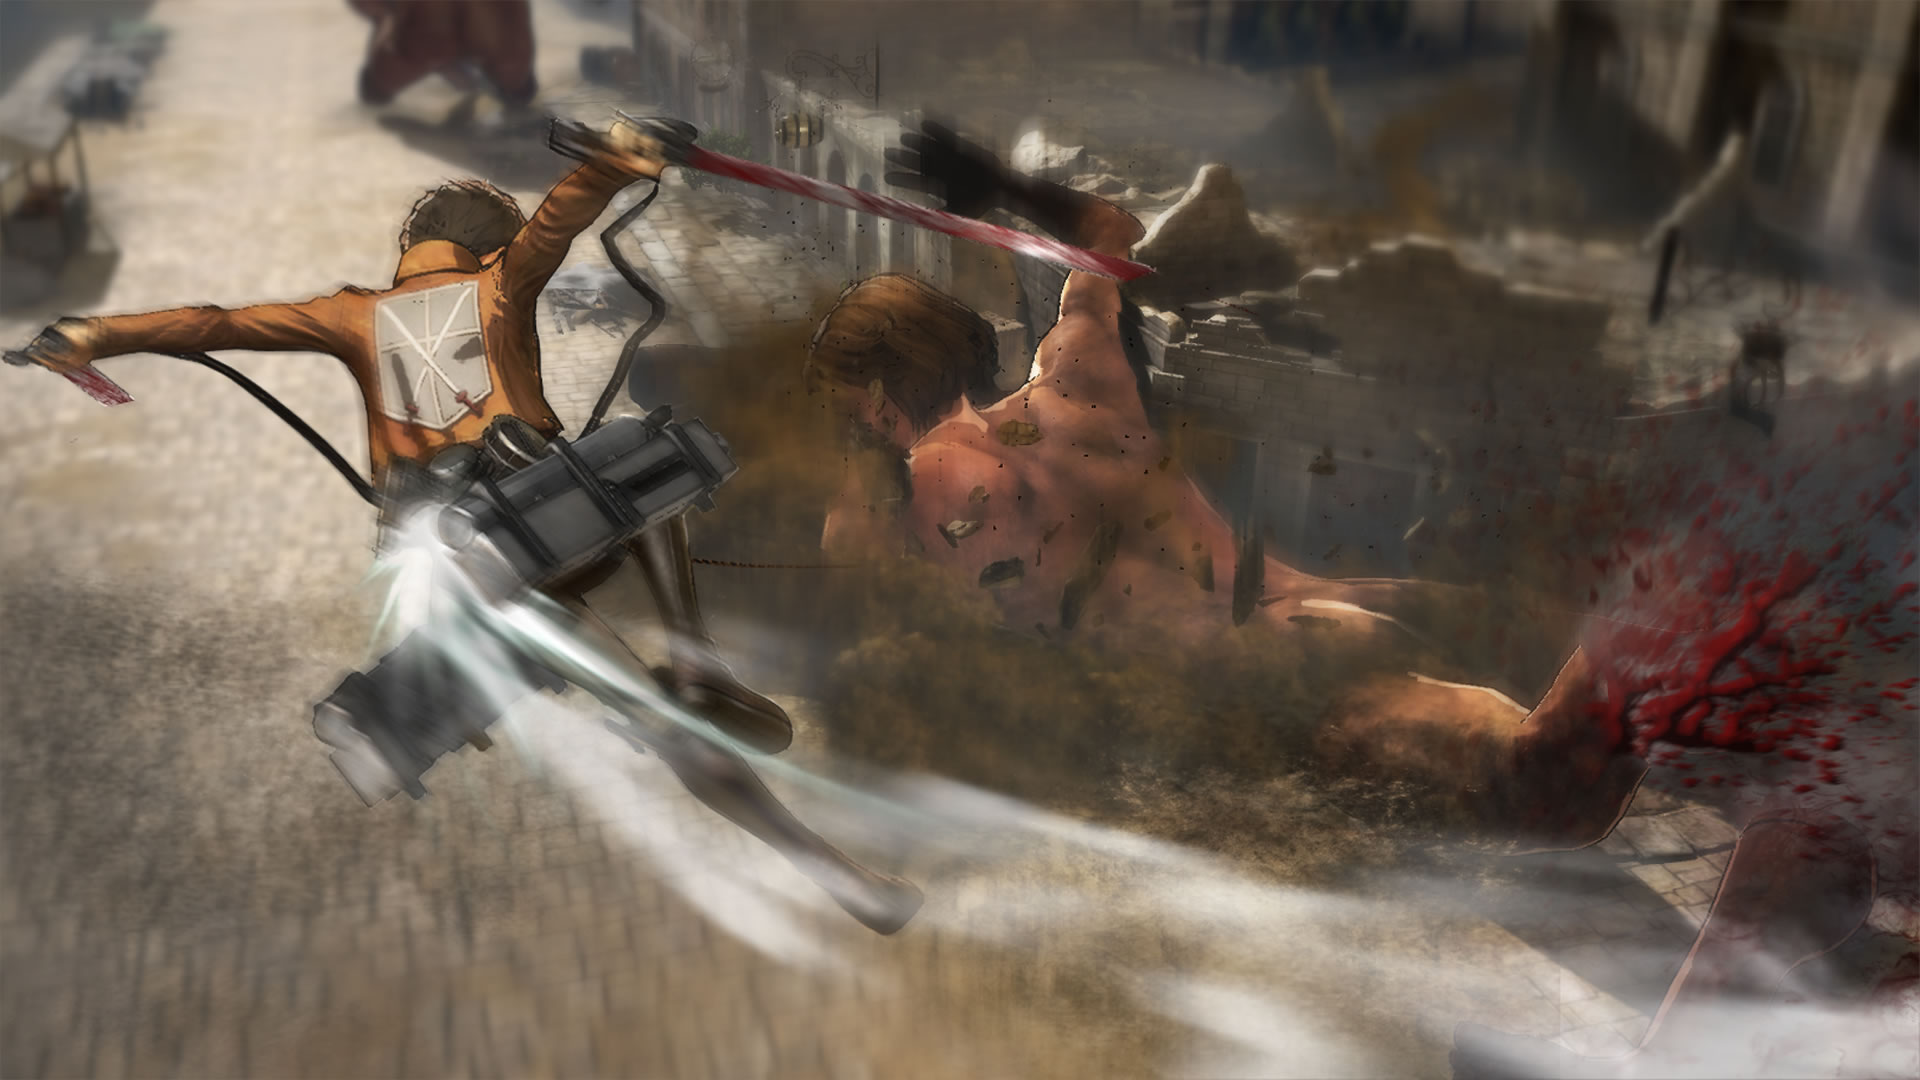 Attack on Titan sells extremely well in Japan.